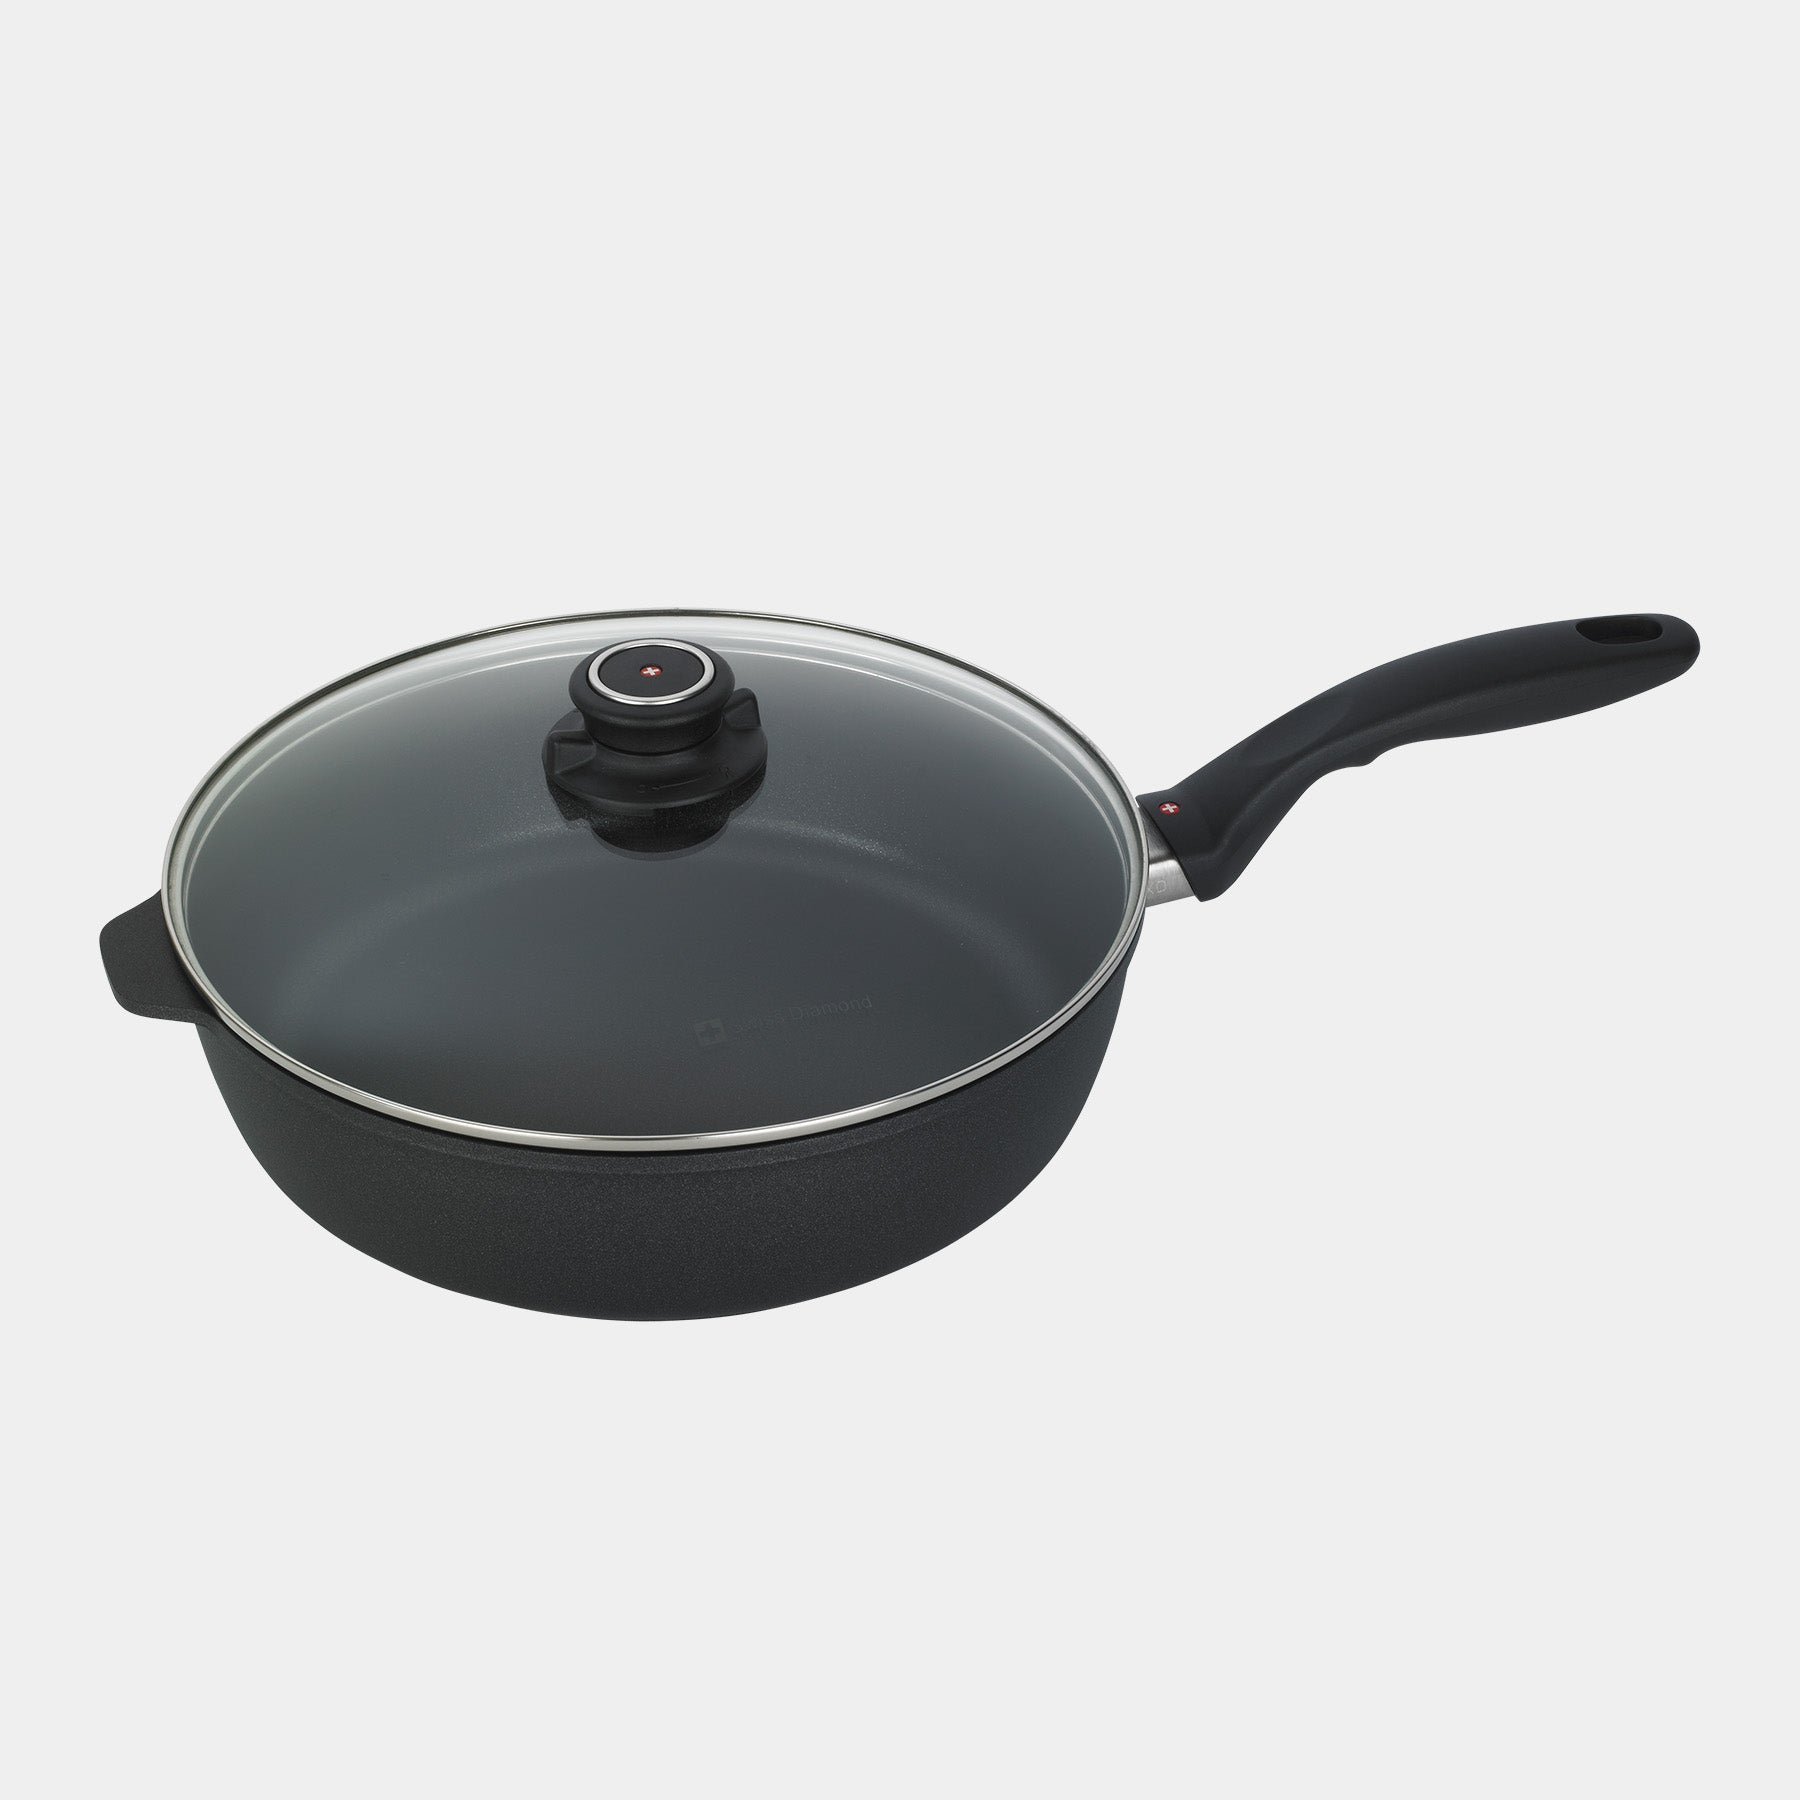 XD Nonstick 4.2 qt Saute Pan with Glass Lid - Induction